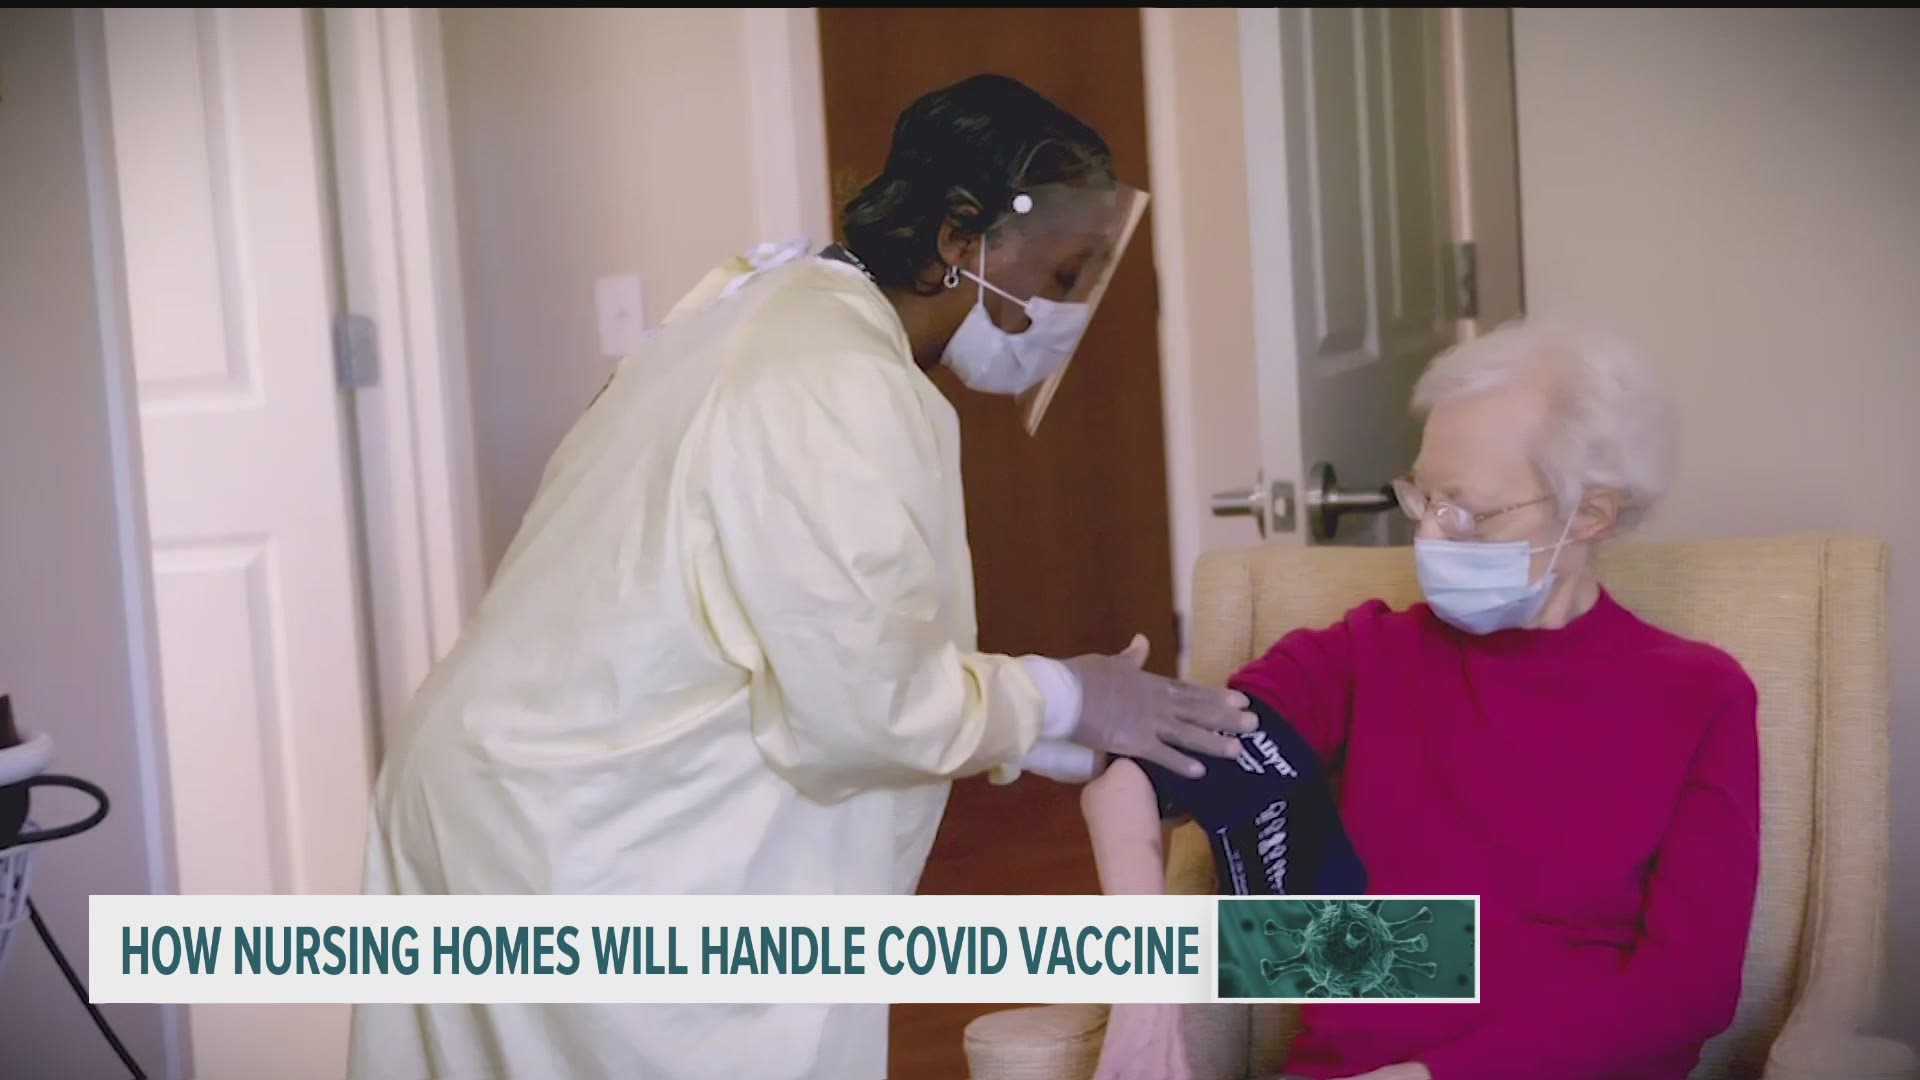 COVID-19 vaccinations will be distributed to Iowa Health Care Association nursing homes by December 20th.